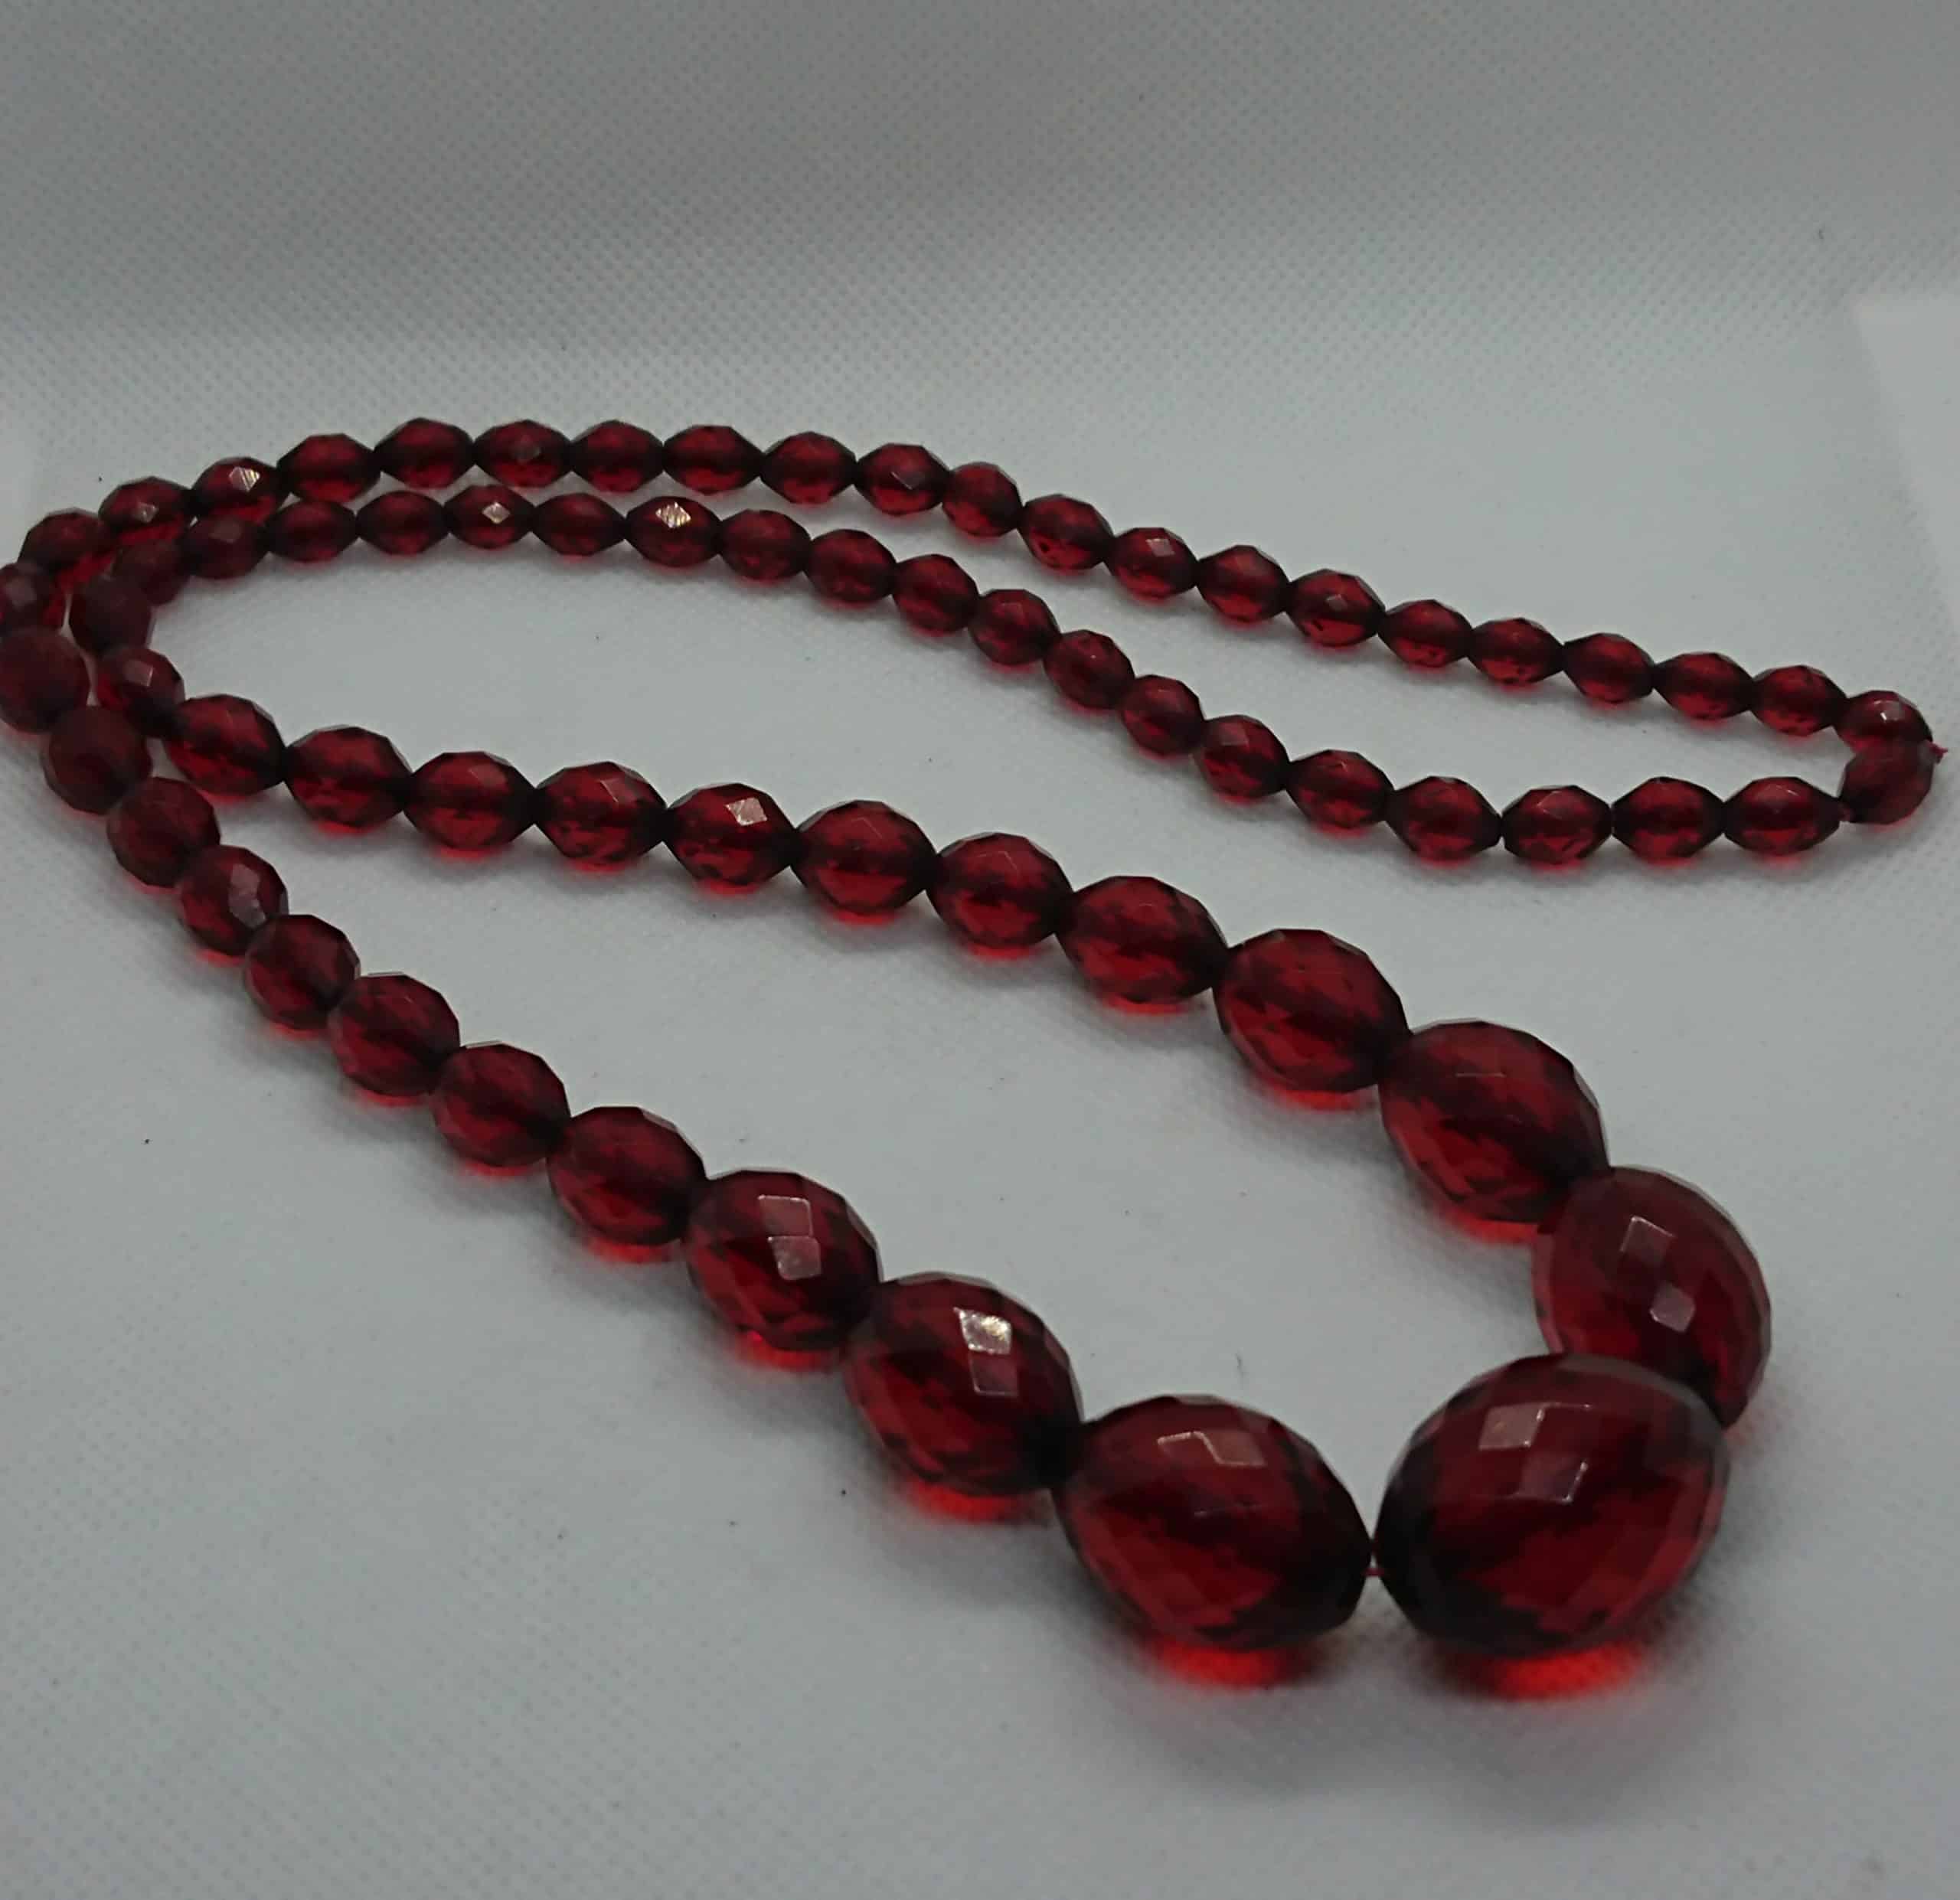 Antique Cherry Amber Bead Necklace Bakelite Faceted Genuine Art Deco 1920s  Very Long 88cm 48.06g Opera Womens Vintage Jewellery Jewelry - Etsy